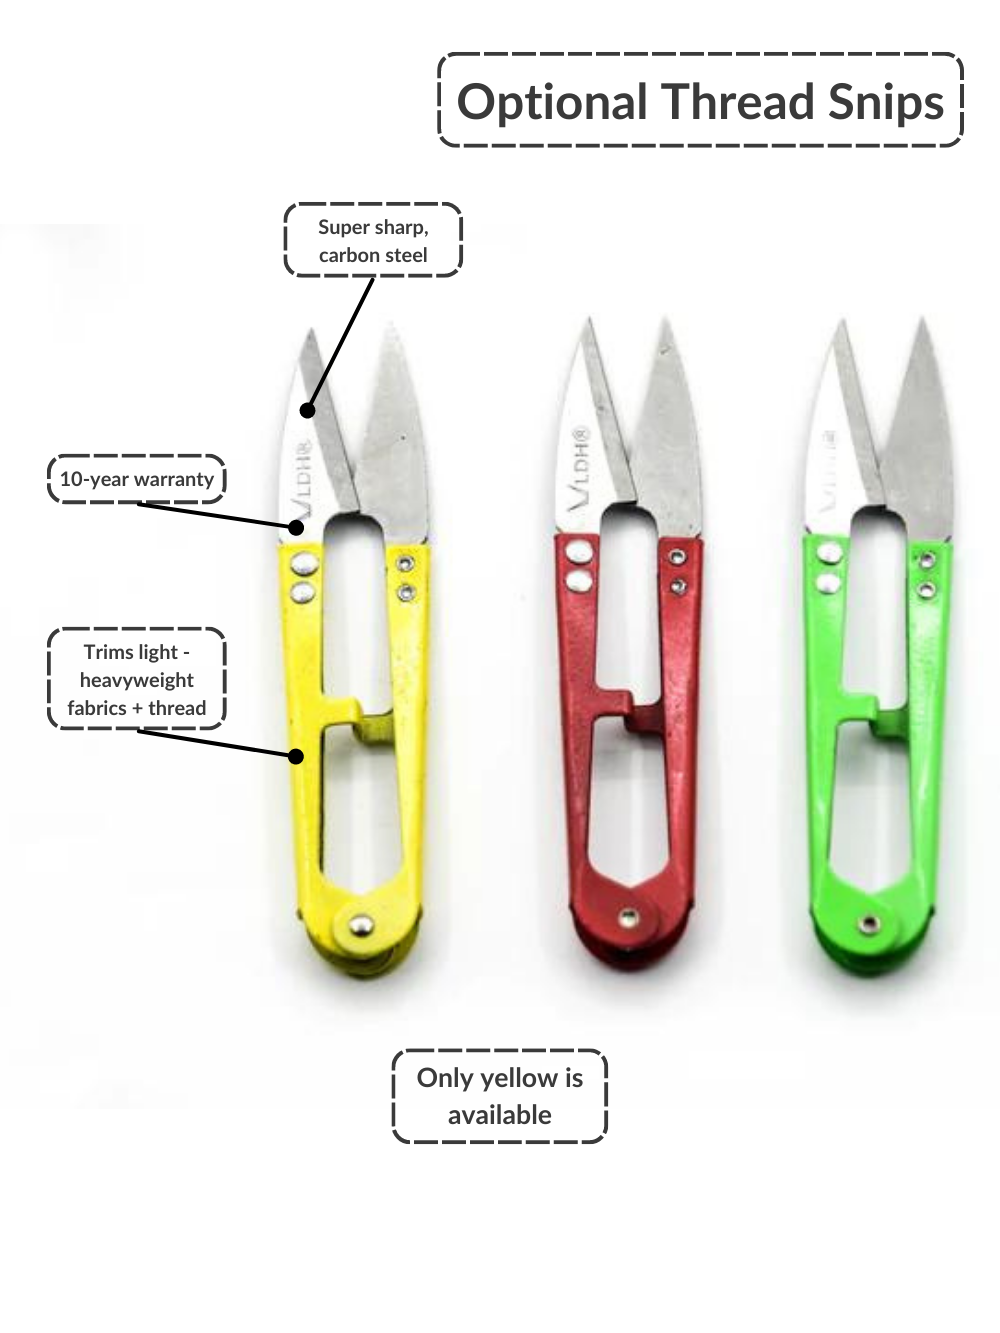 Optional thread snips are super sharp, carbon steel with 10 year warranty. Trims light-heavyweight fabrics and thread. Only yellow snips are available. Shown with red and green snips.